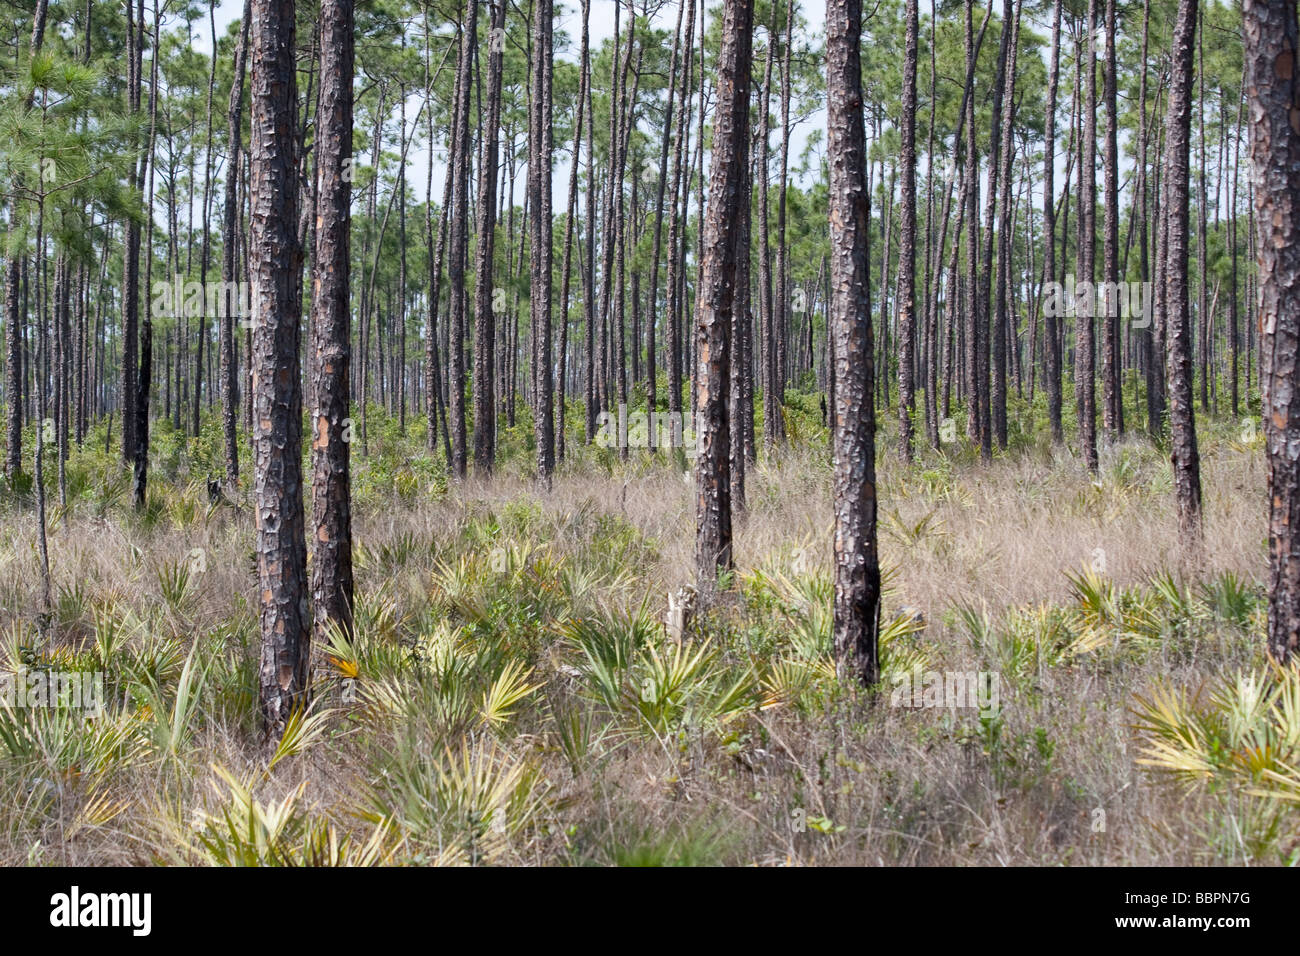 A forest of long pine trees near the eastern edge of the Everglades National Park in Florida is aptly named 'Long Pine Key.' Stock Photo